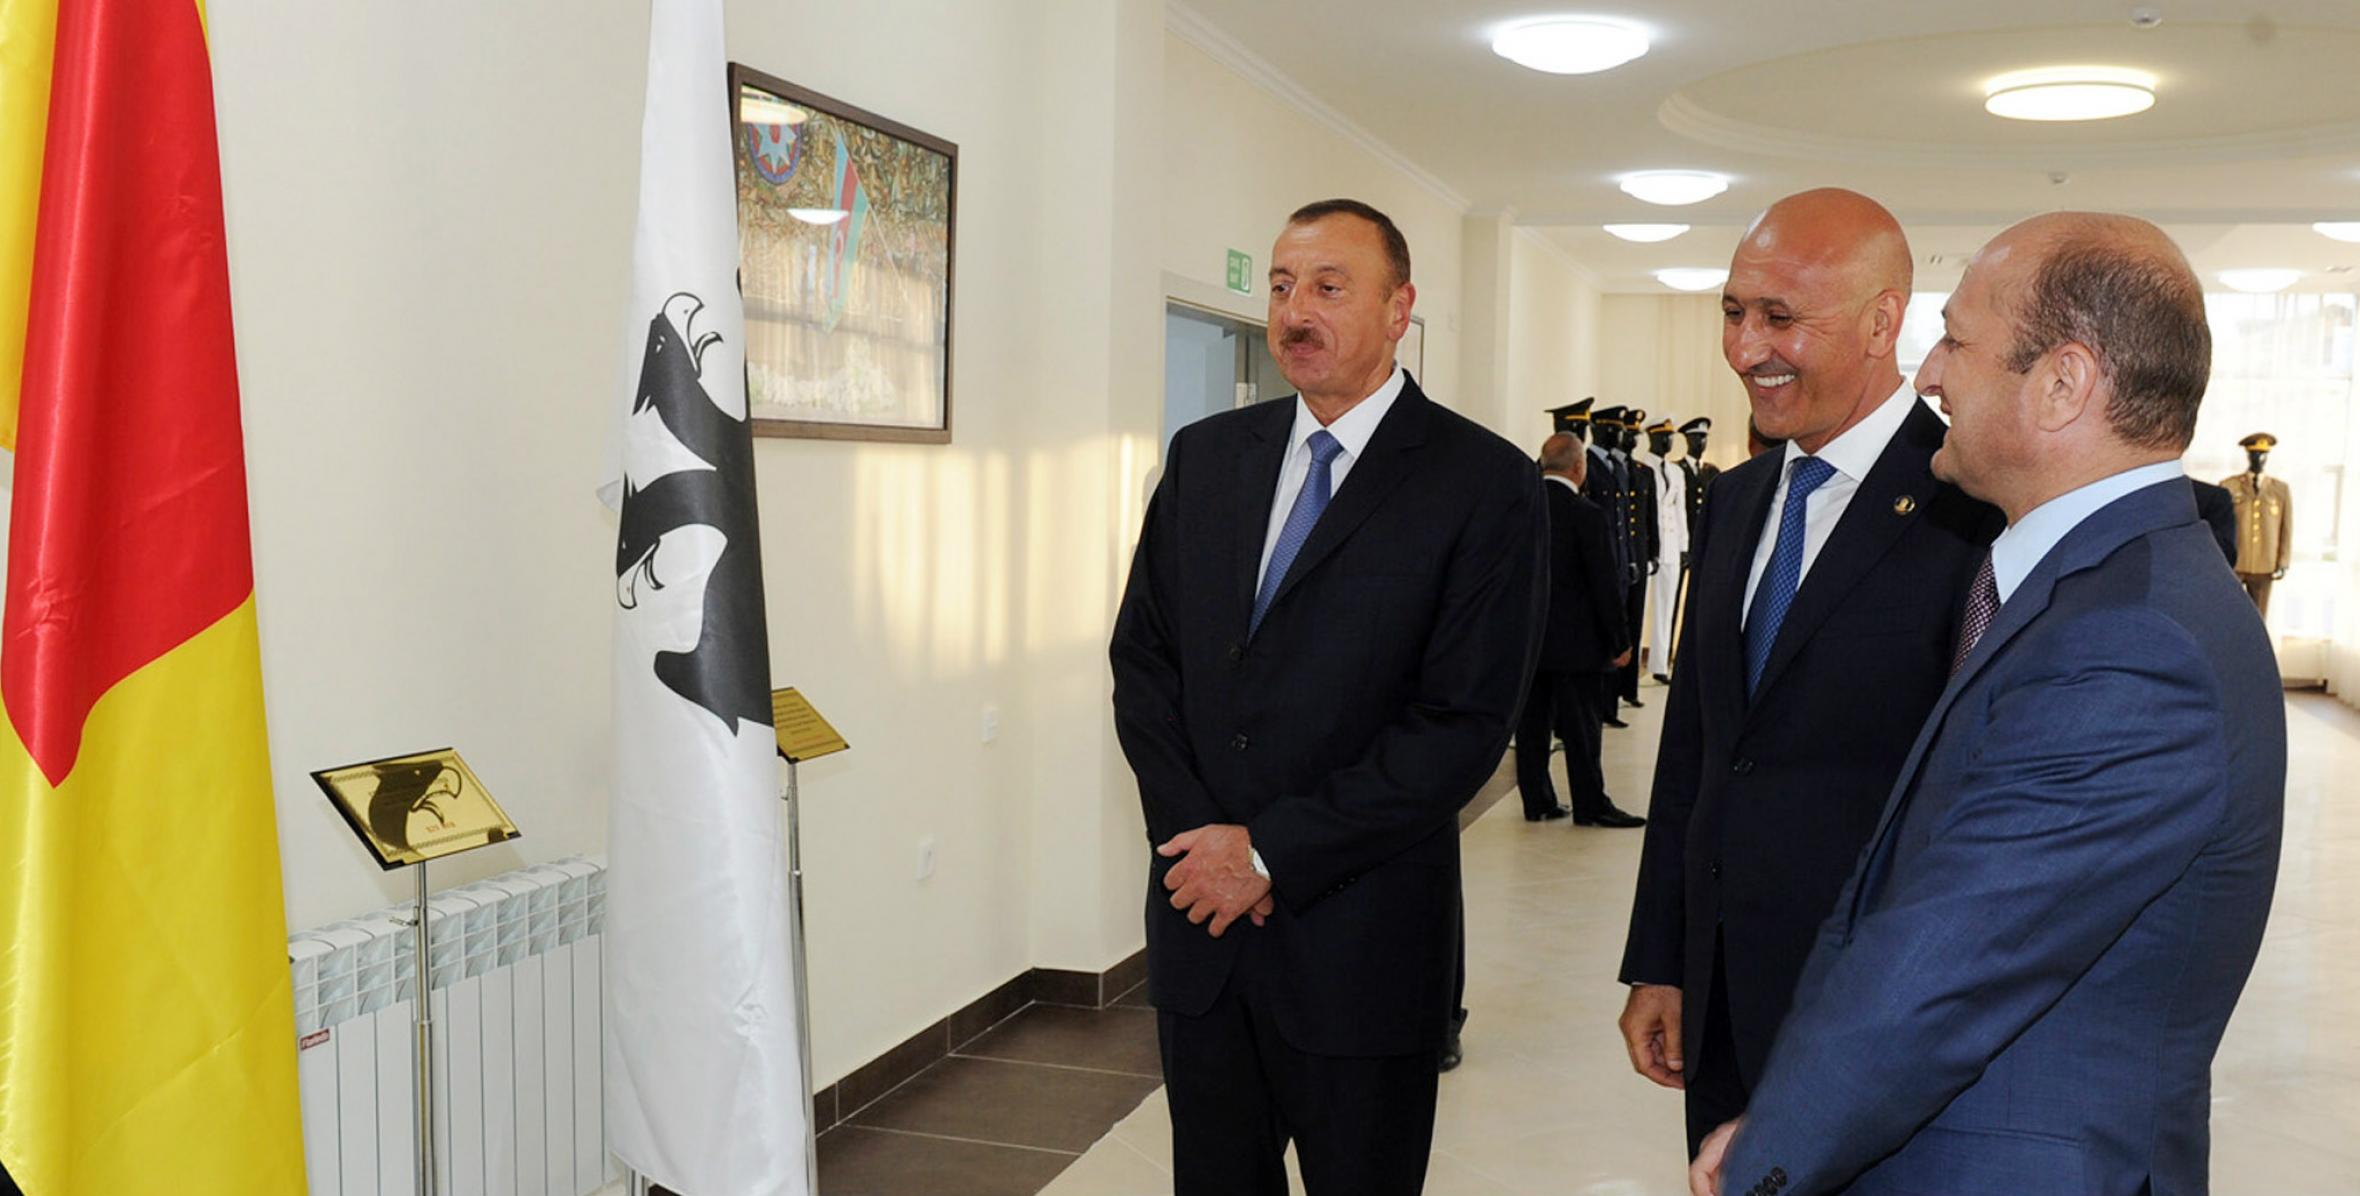 Ilham Aliyev attended the opening of a Youth Center in Siyazan